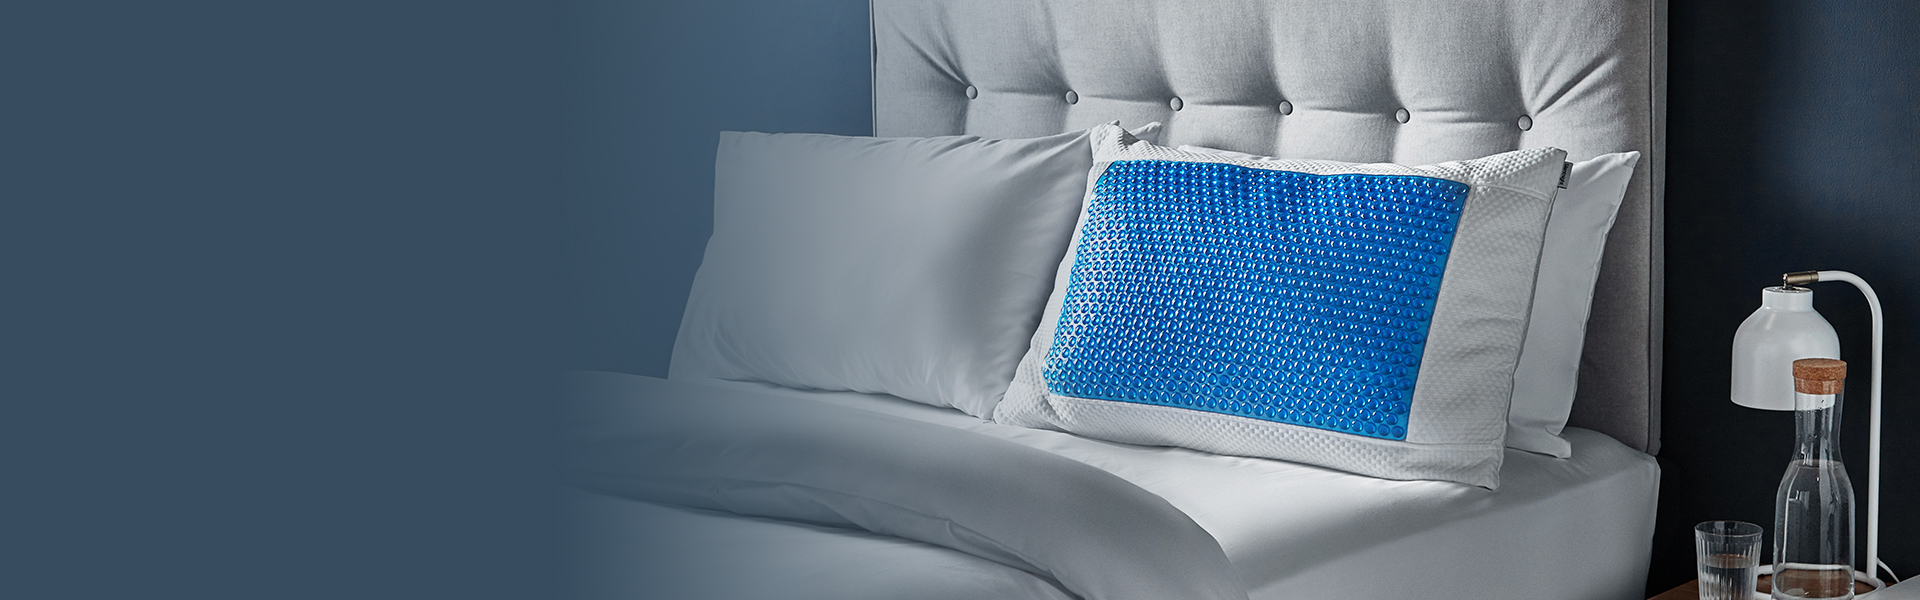 Cool gel pillow on bed with set of pillows